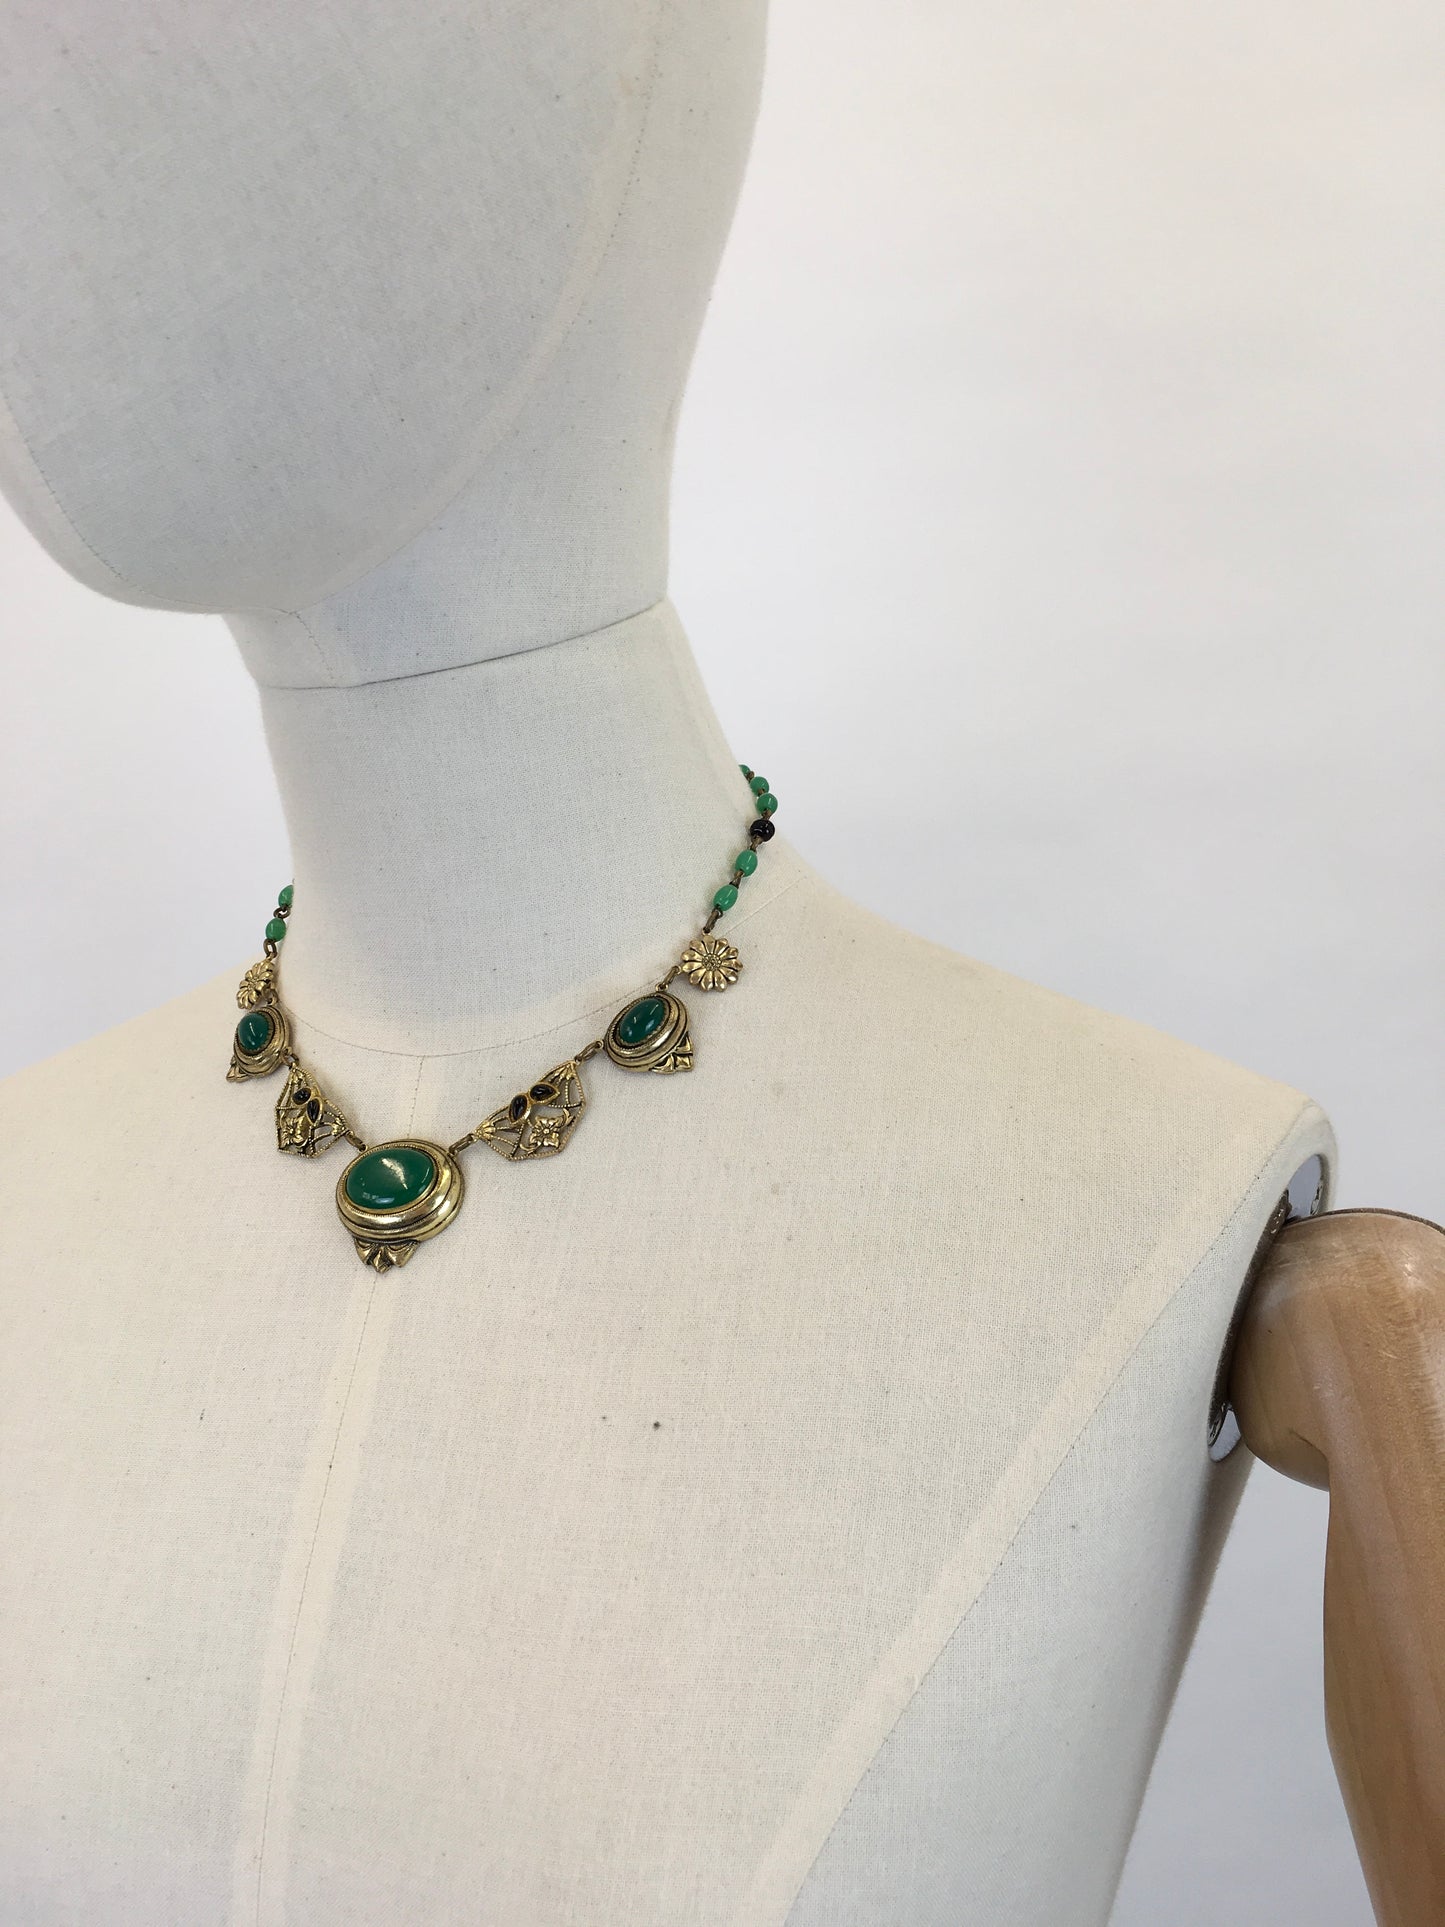 Original 1930s STUNNING Deco Necklace - Brass and Classic Deco Green Glass Beads